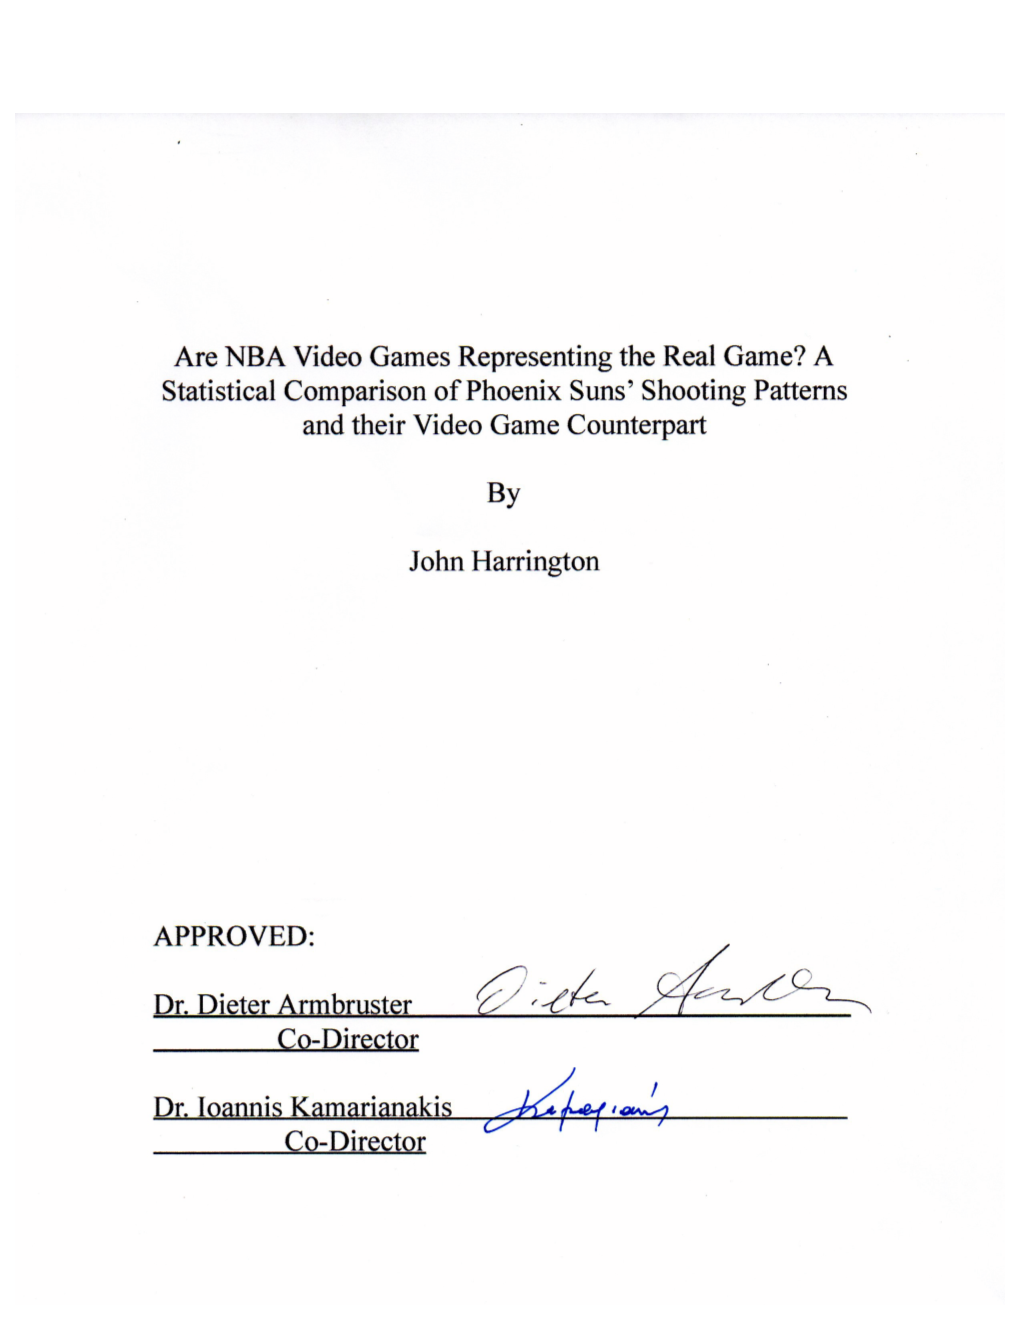 Are NBA Video Games Representing the Real Game? a Statistical